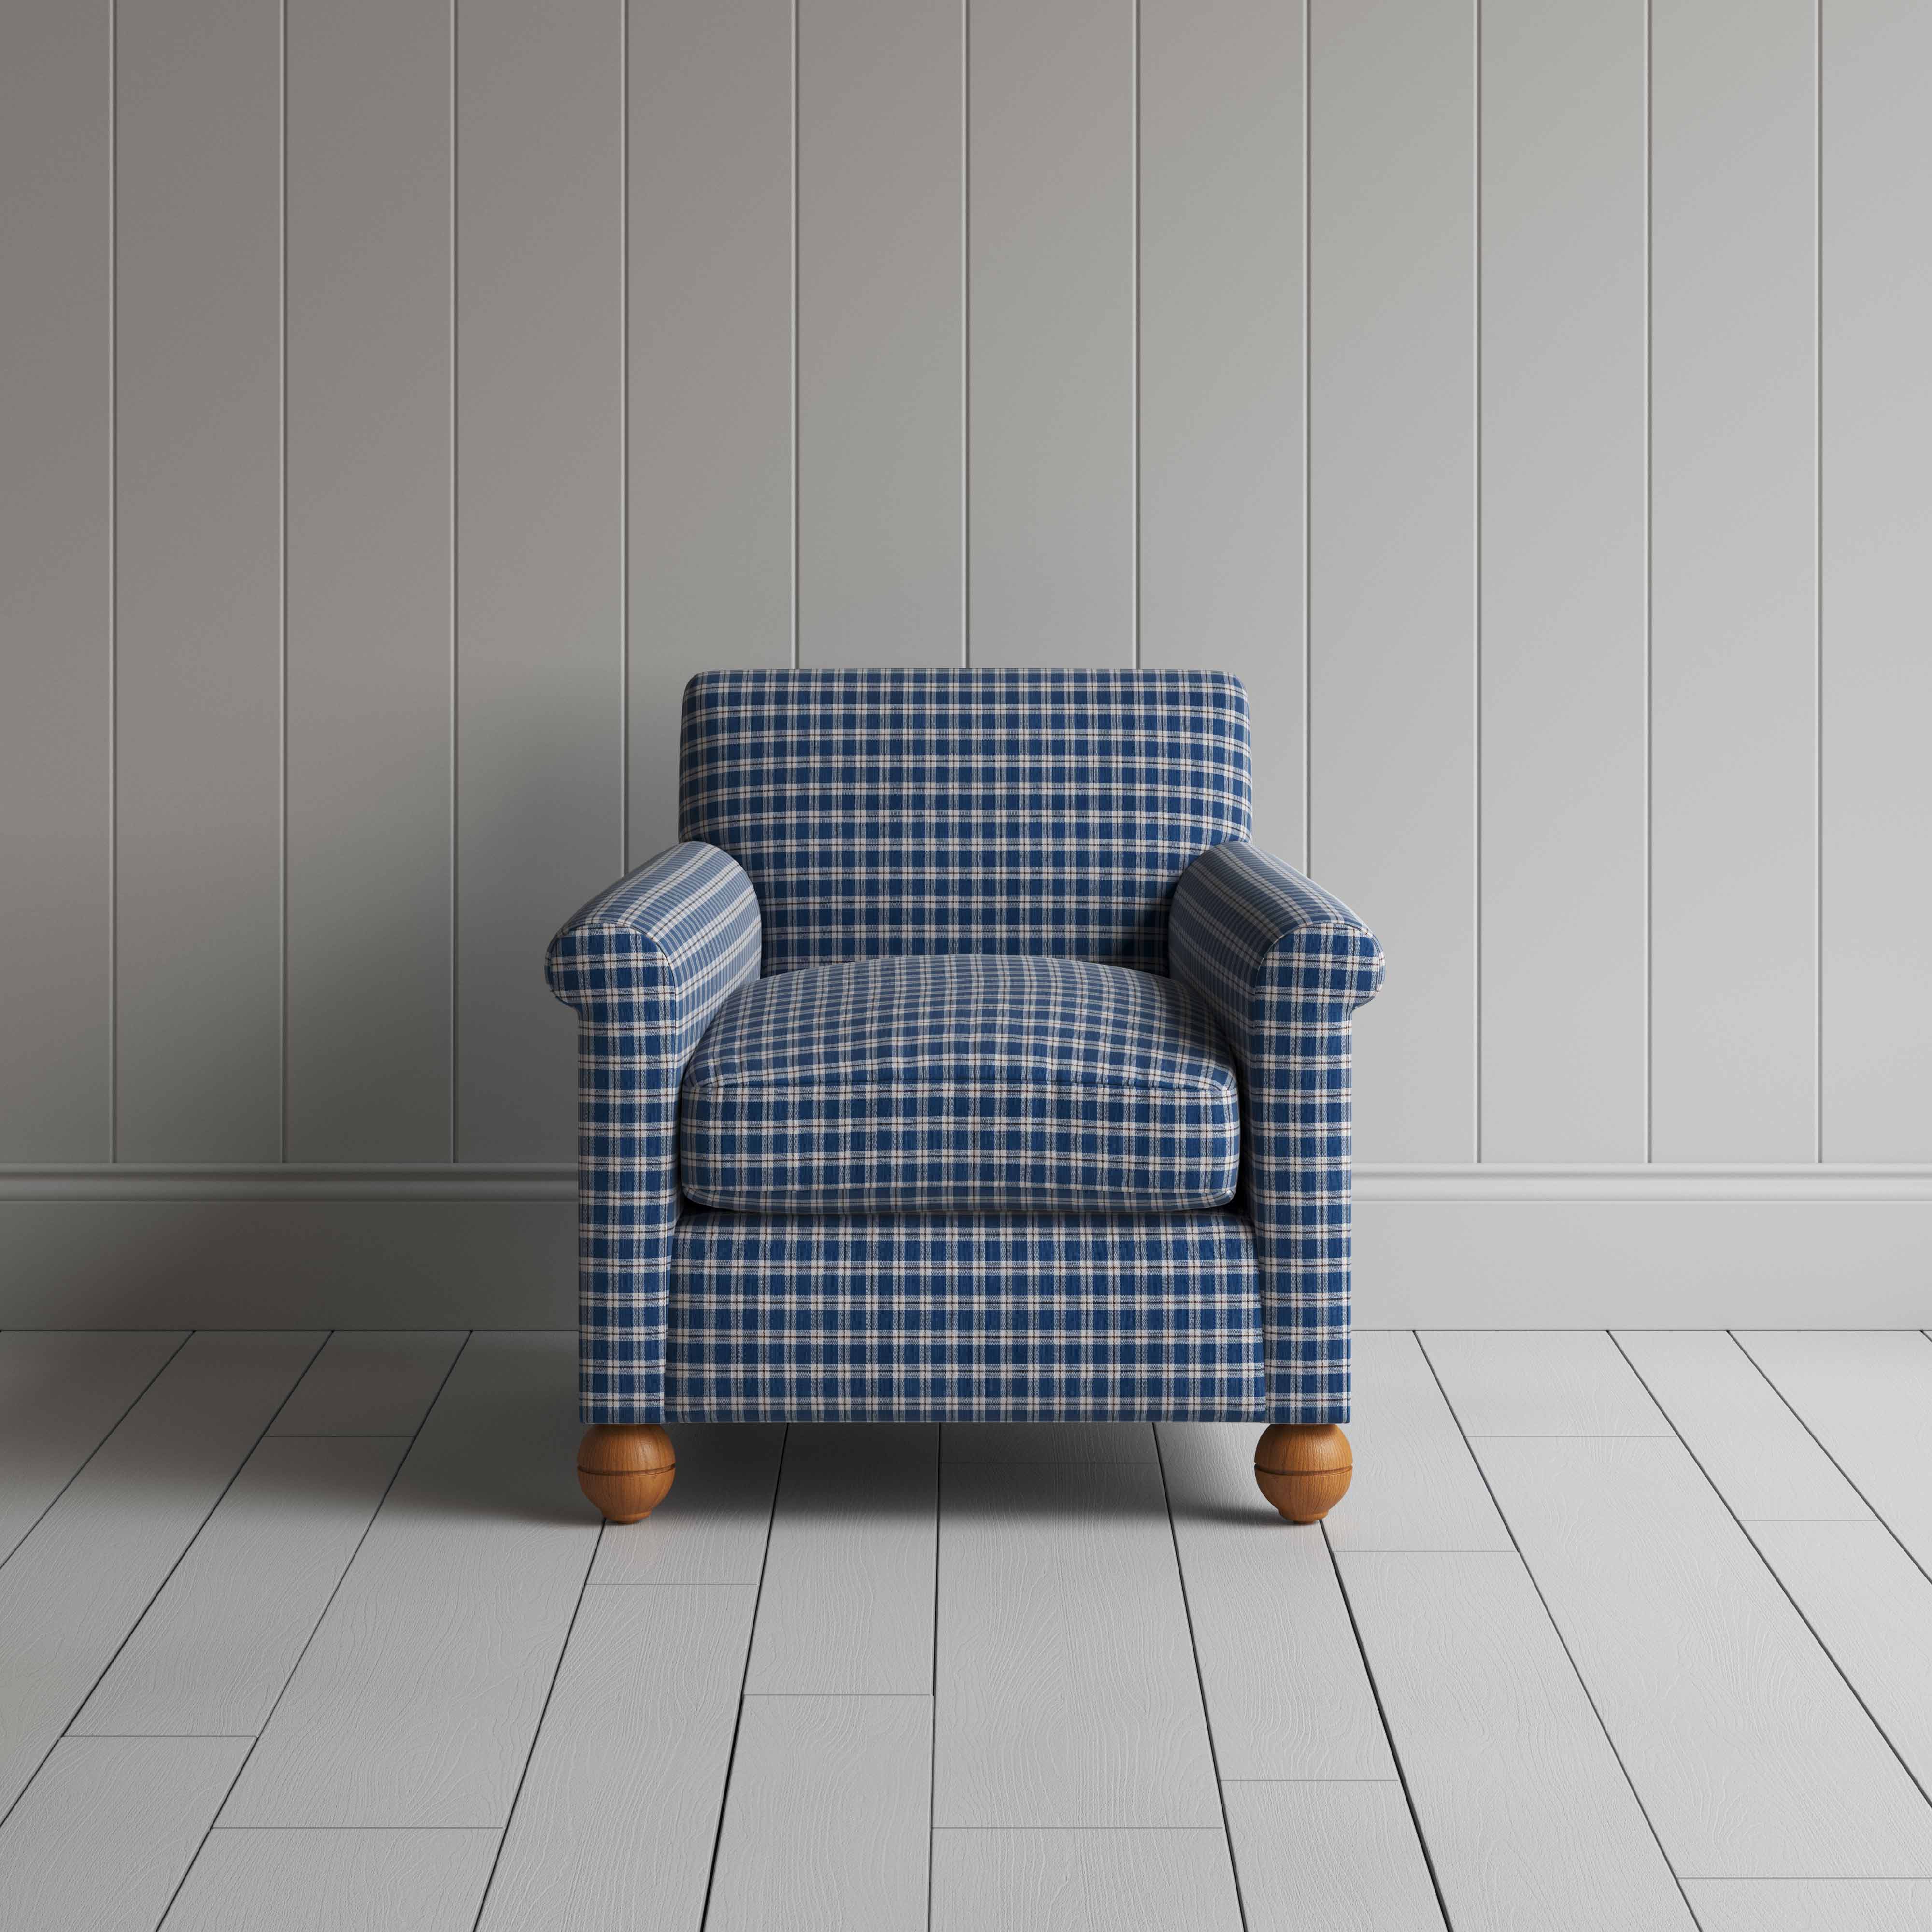  Idler Armchair in Well Plaid Cotton, Blue Brown 